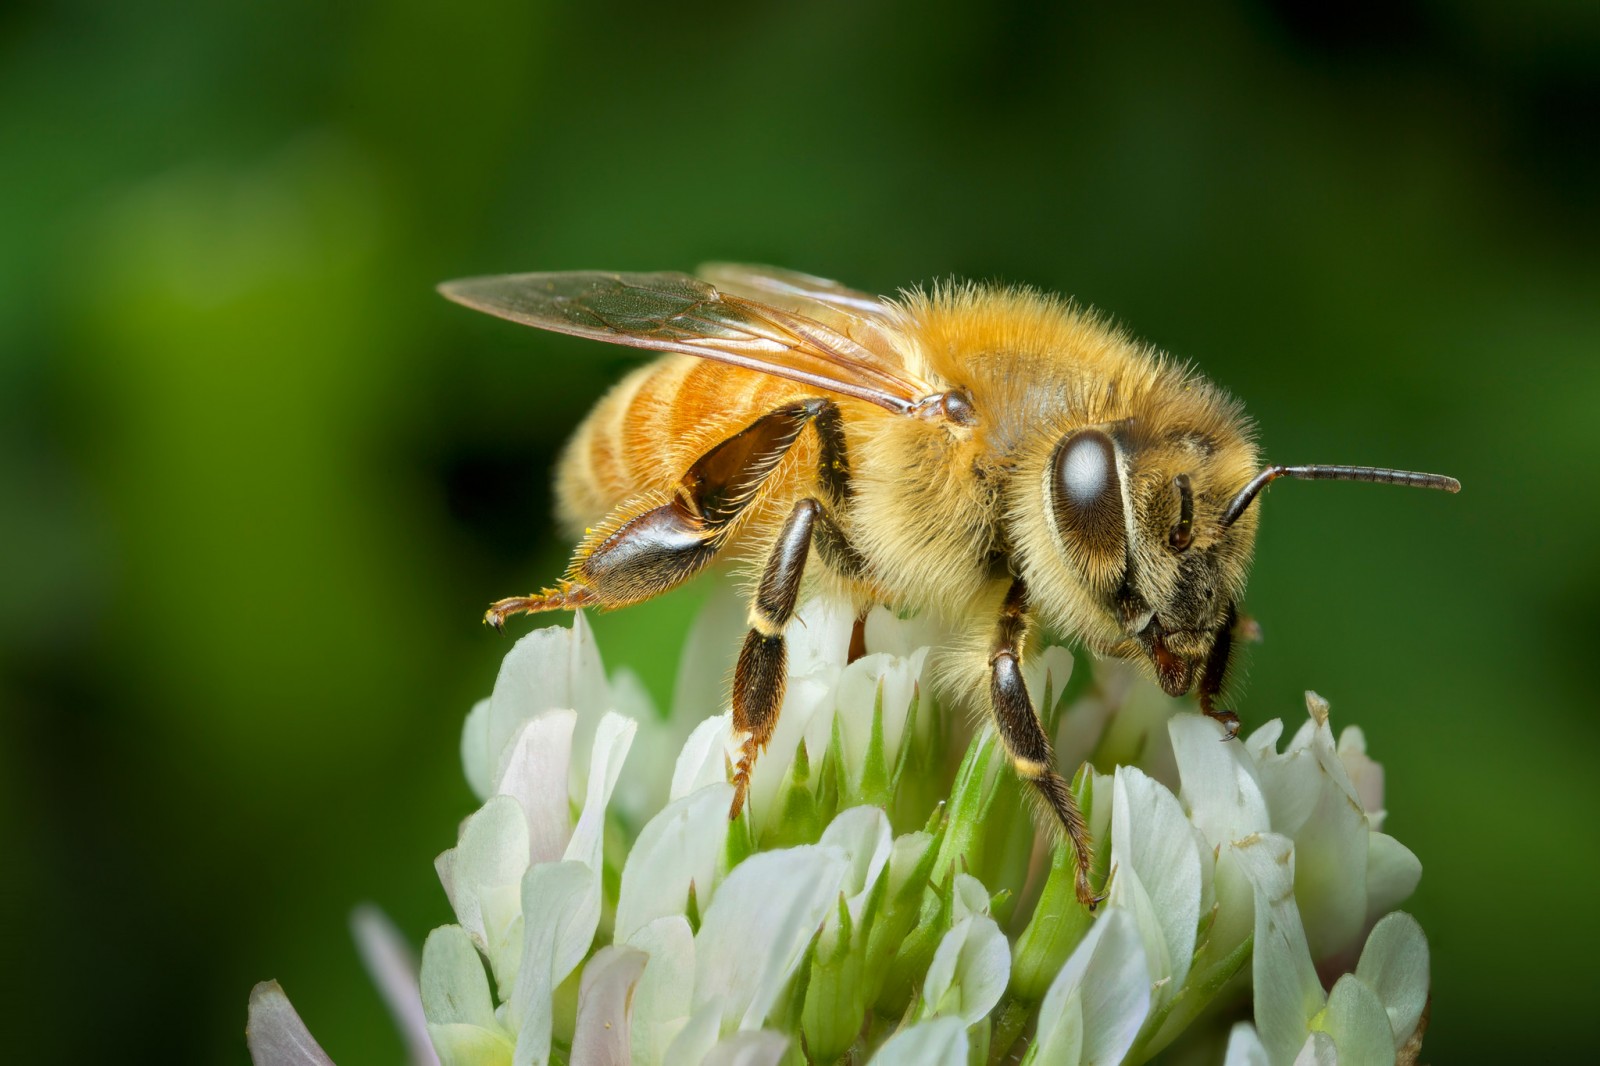 New research shows why bees matter so much to humans